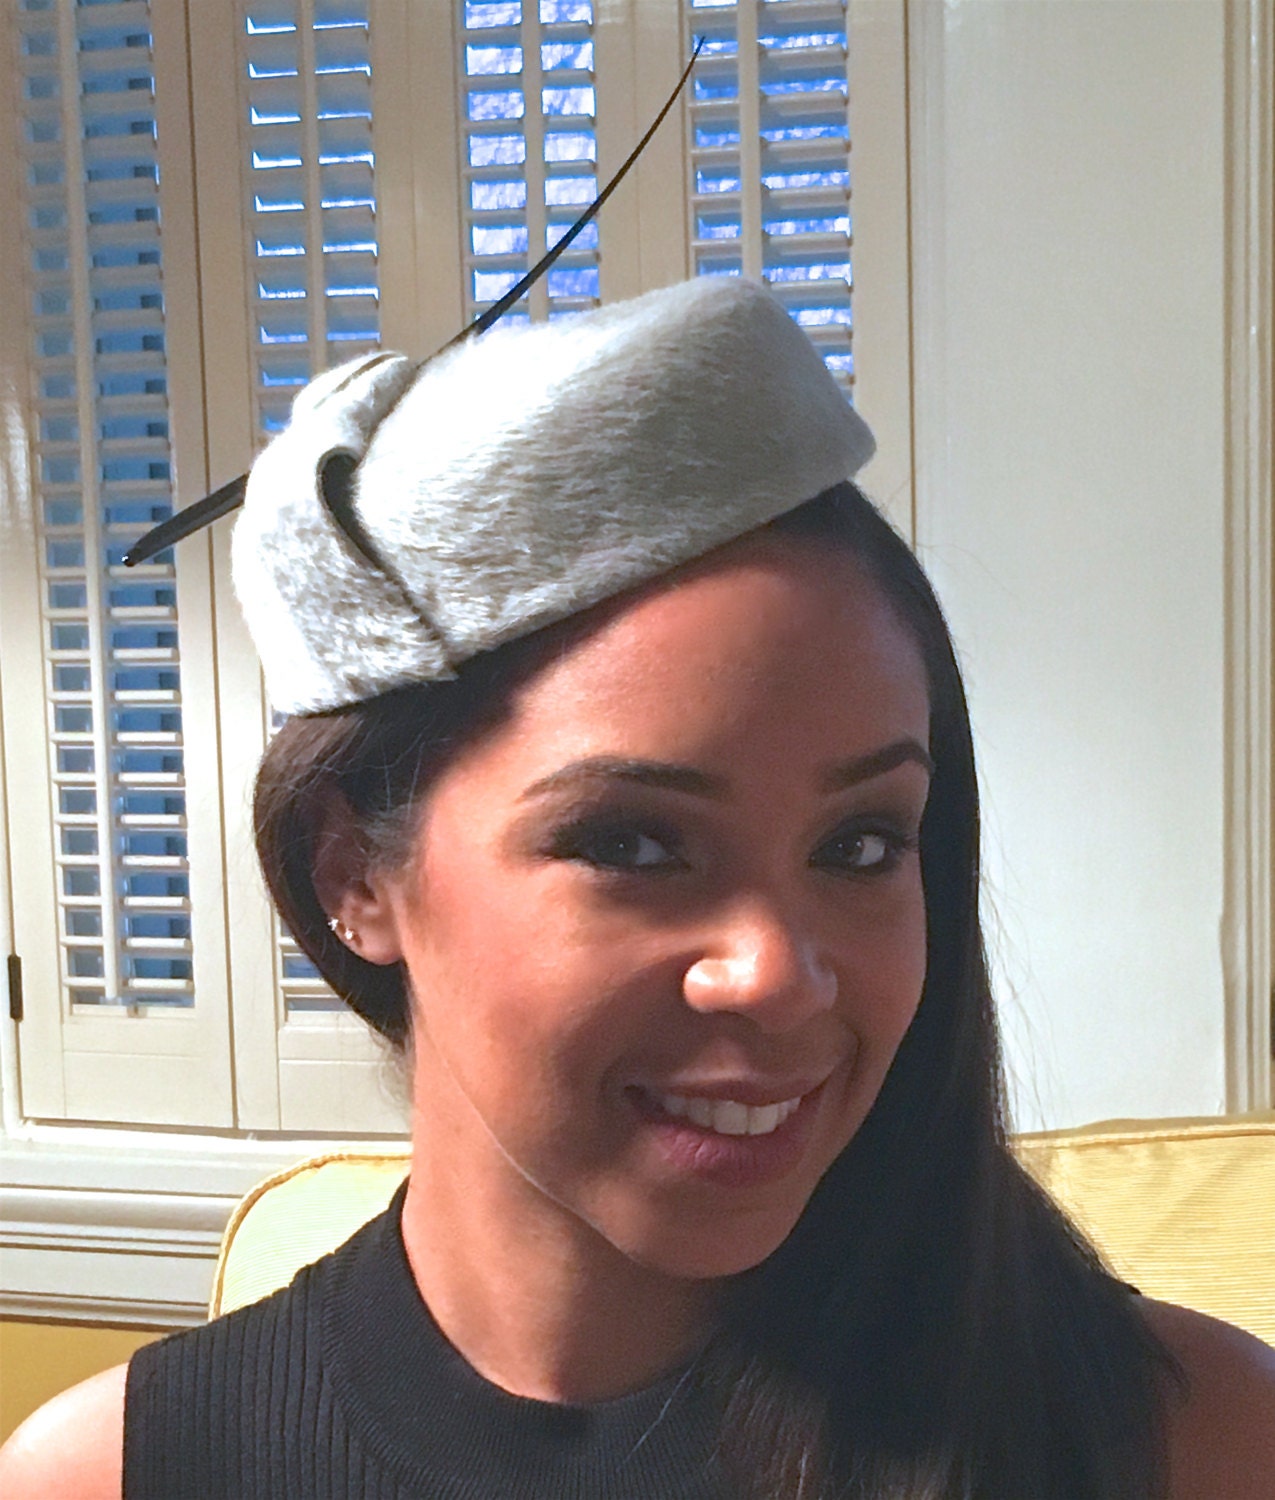 Grey Long Hair Fur Felt Pill Box Hat with Black Quill Spine- Winter Races-Polo Matches Hat-Church Hat-Wedding Hat-Mother of the Bride Hat!